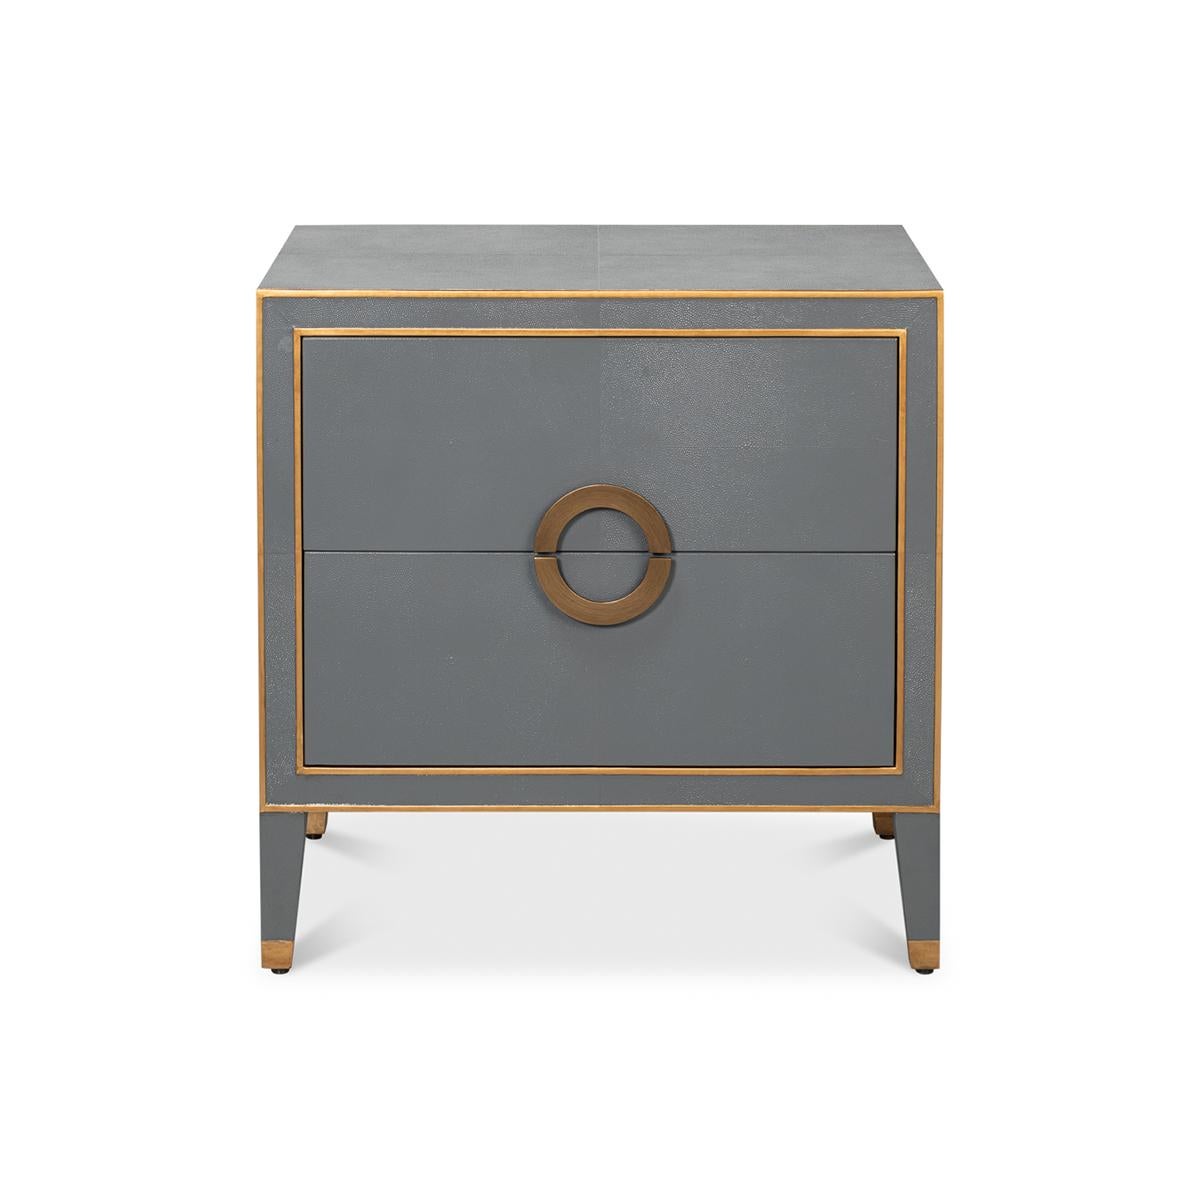 This piece combines functionality with unparalleled style, creating a statement of transitional elegance.

The standout feature of this nightstand is the rich, warm silver hue that perfectly contrasts with the elegant golden accents, bringing a